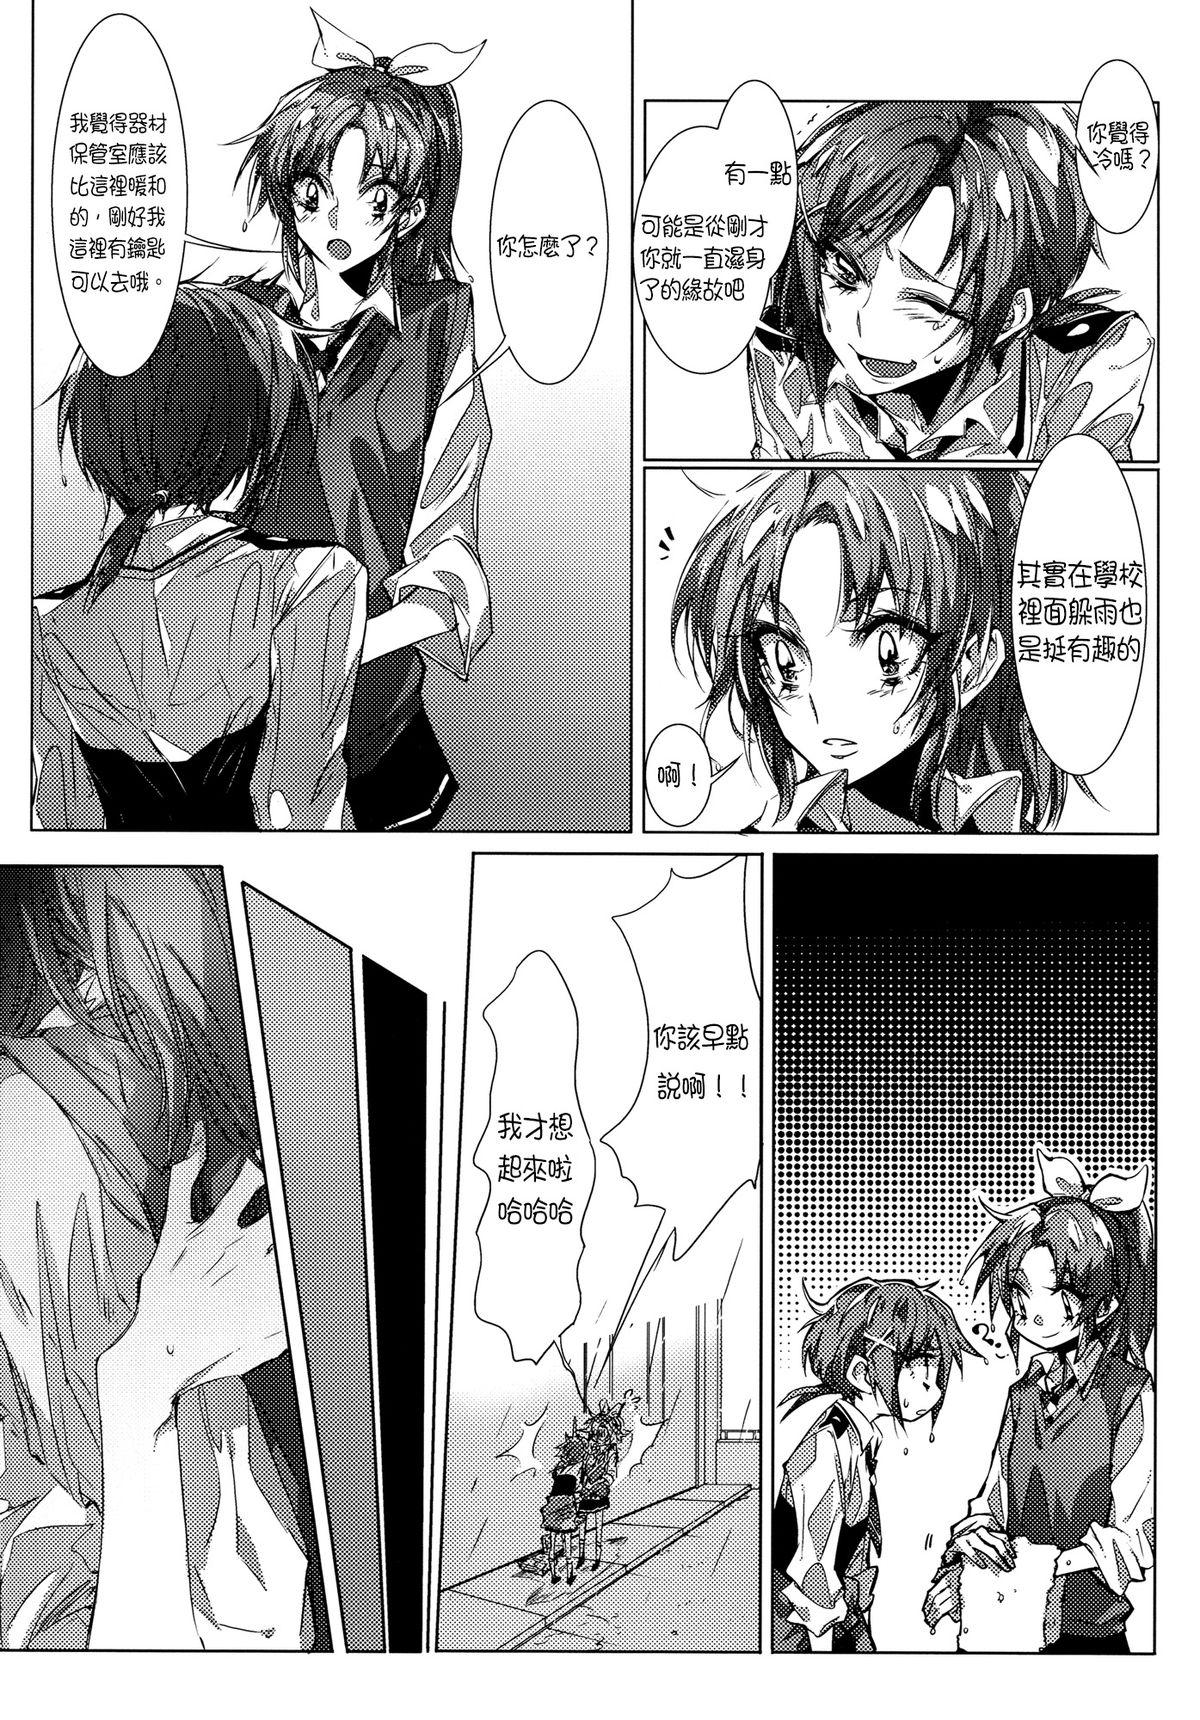 Fuck For Cash Houkago 23 | After School 23 - Smile precure Step - Page 4